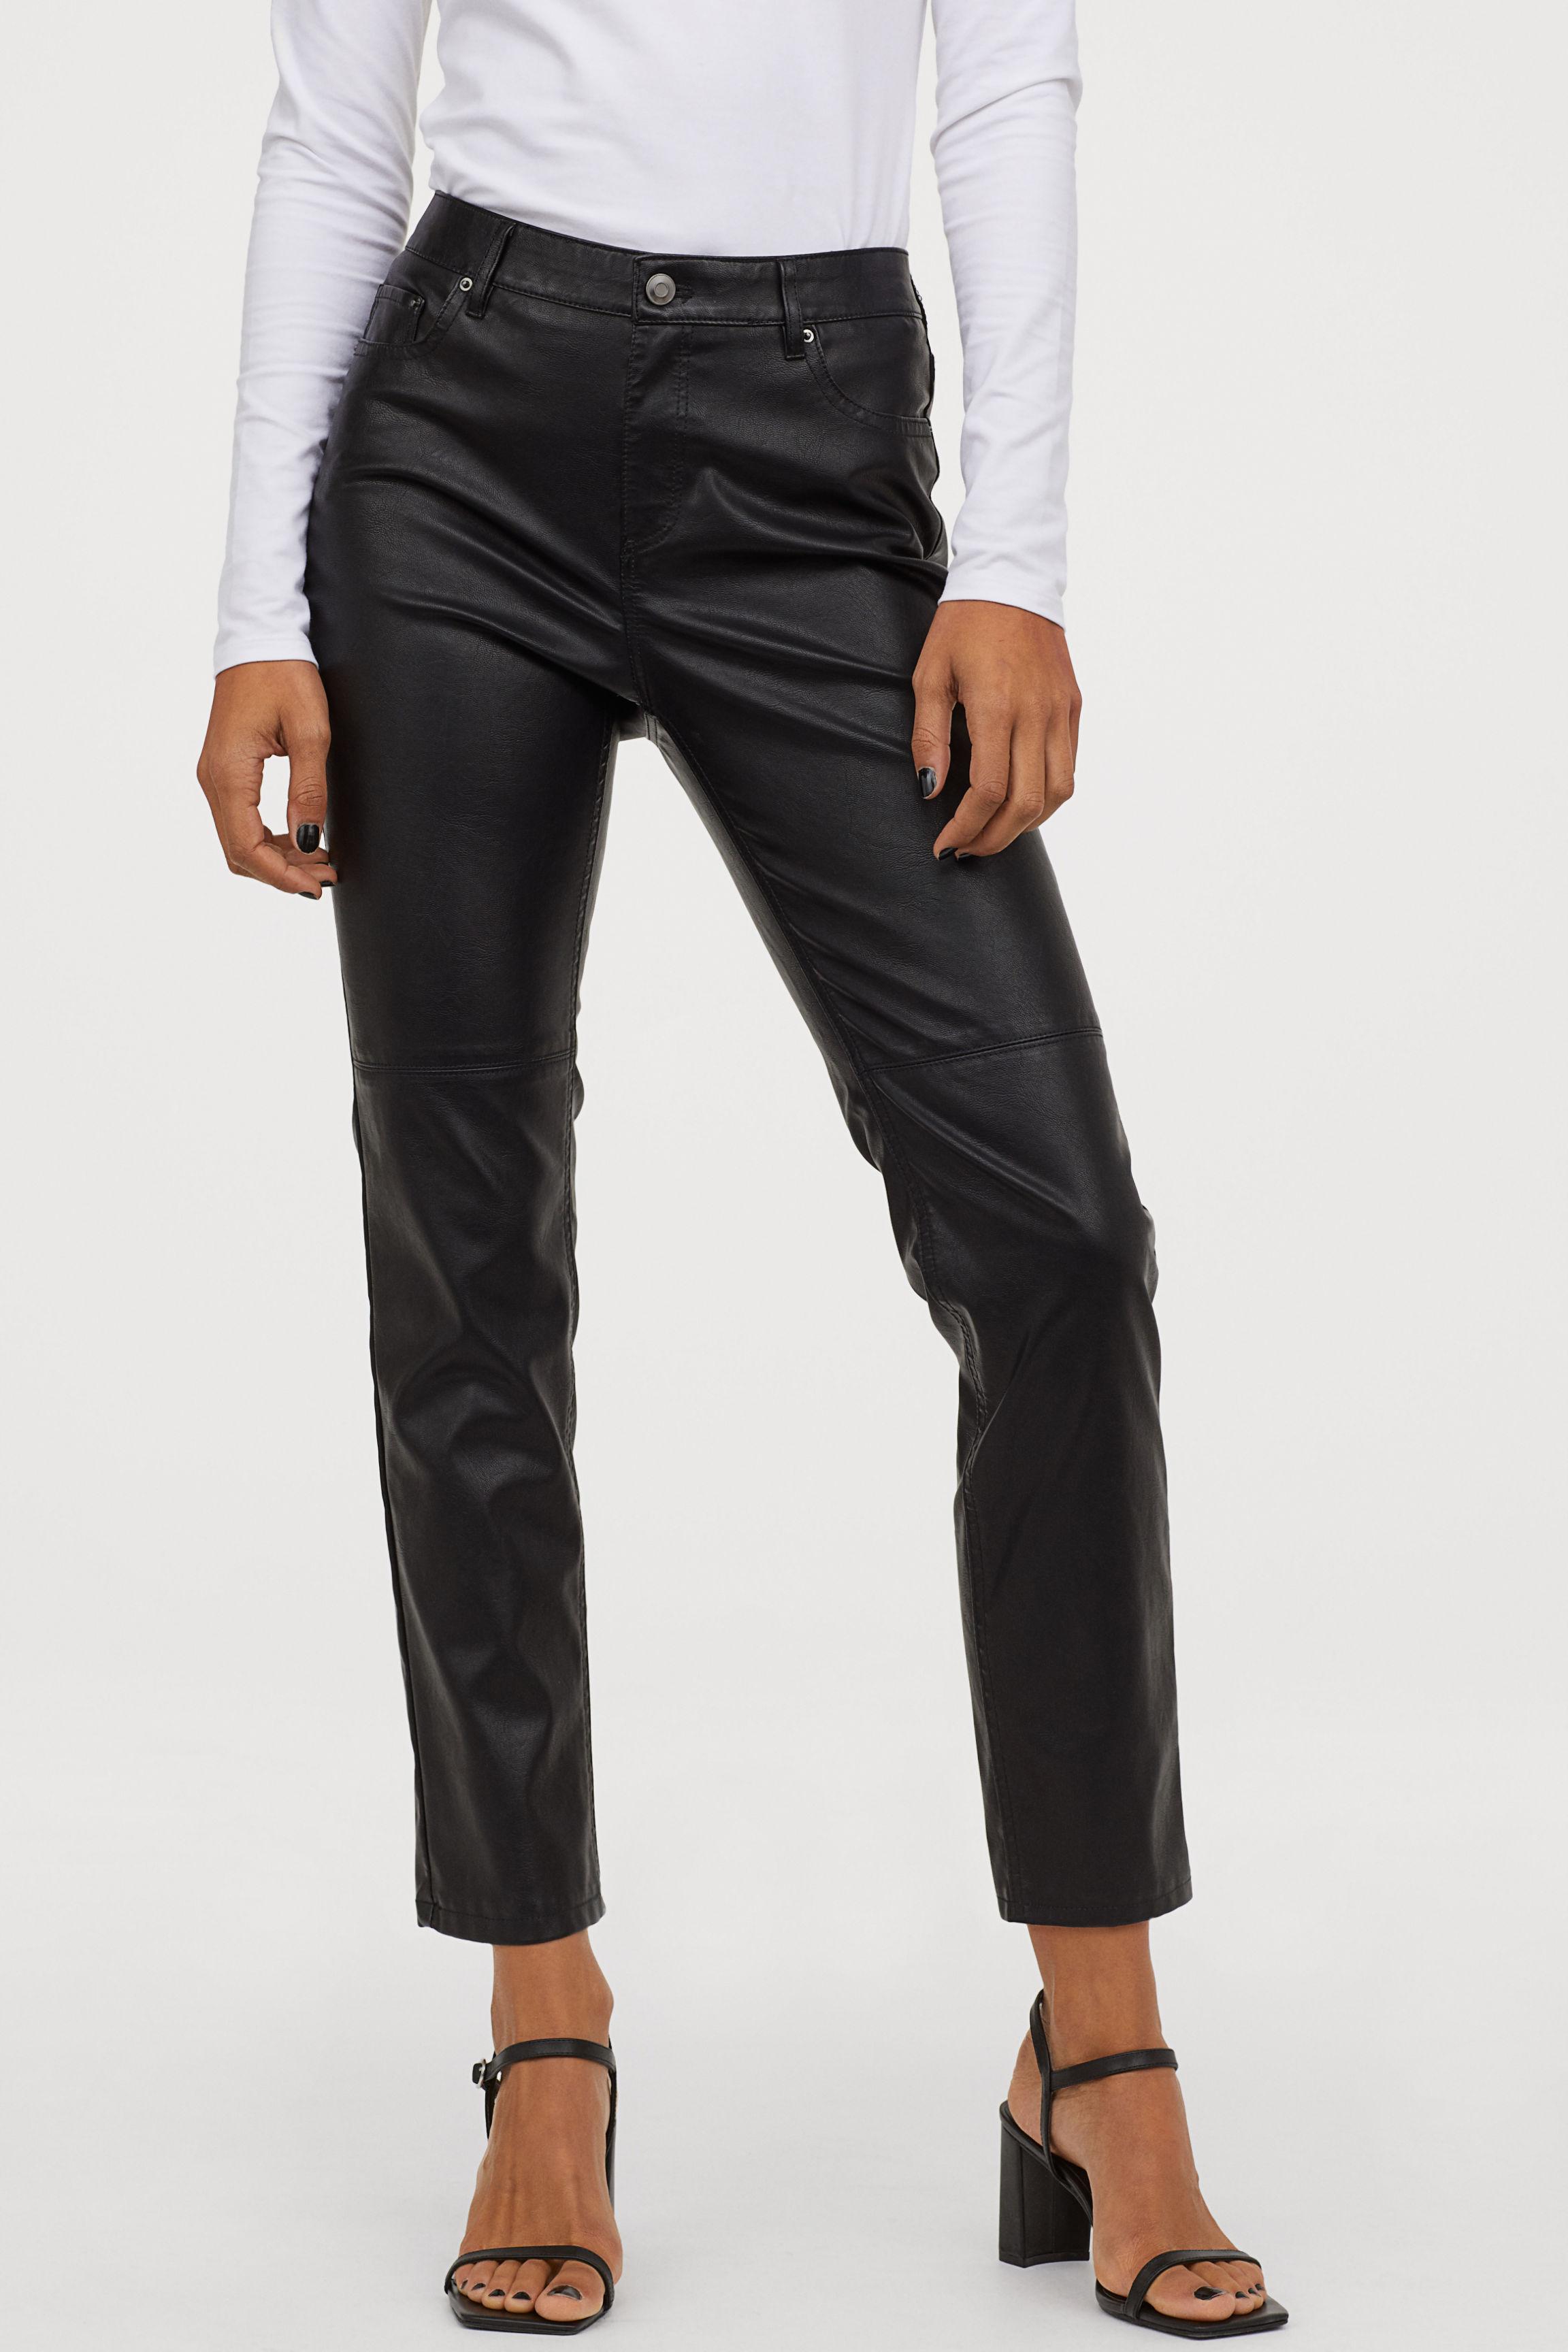 H&M Faux Leather Pants in Black - Lyst